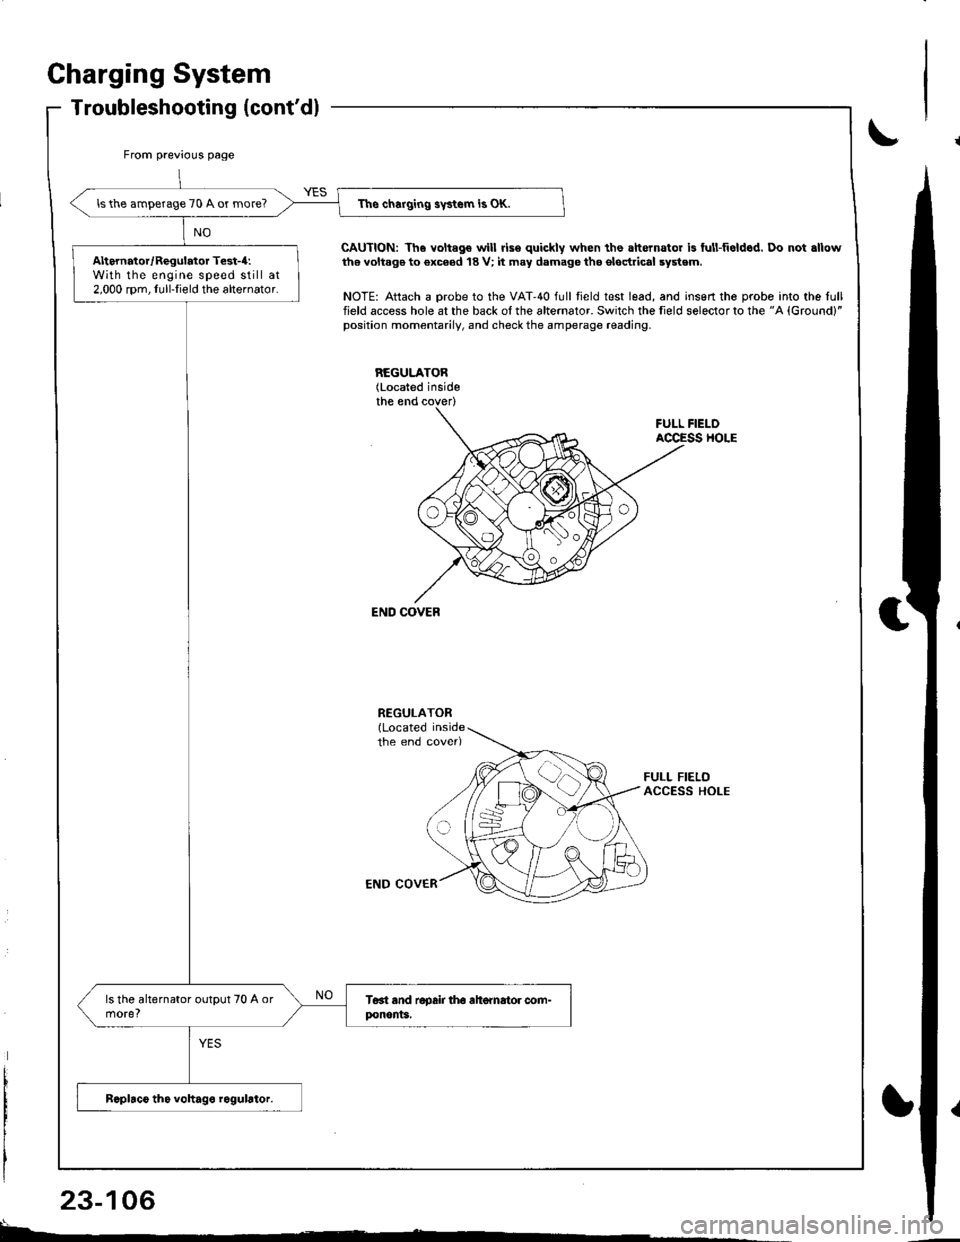 HONDA INTEGRA 1998 4.G Owners Manual From previol.rs page
The charging swtem is OK.lsthe amperage 70 A or more?
Alternator/Regulator Test-4:With the engine speed still at2,000 rpm, Iull-Iield the alternator.
Charging System
Troubleshooti